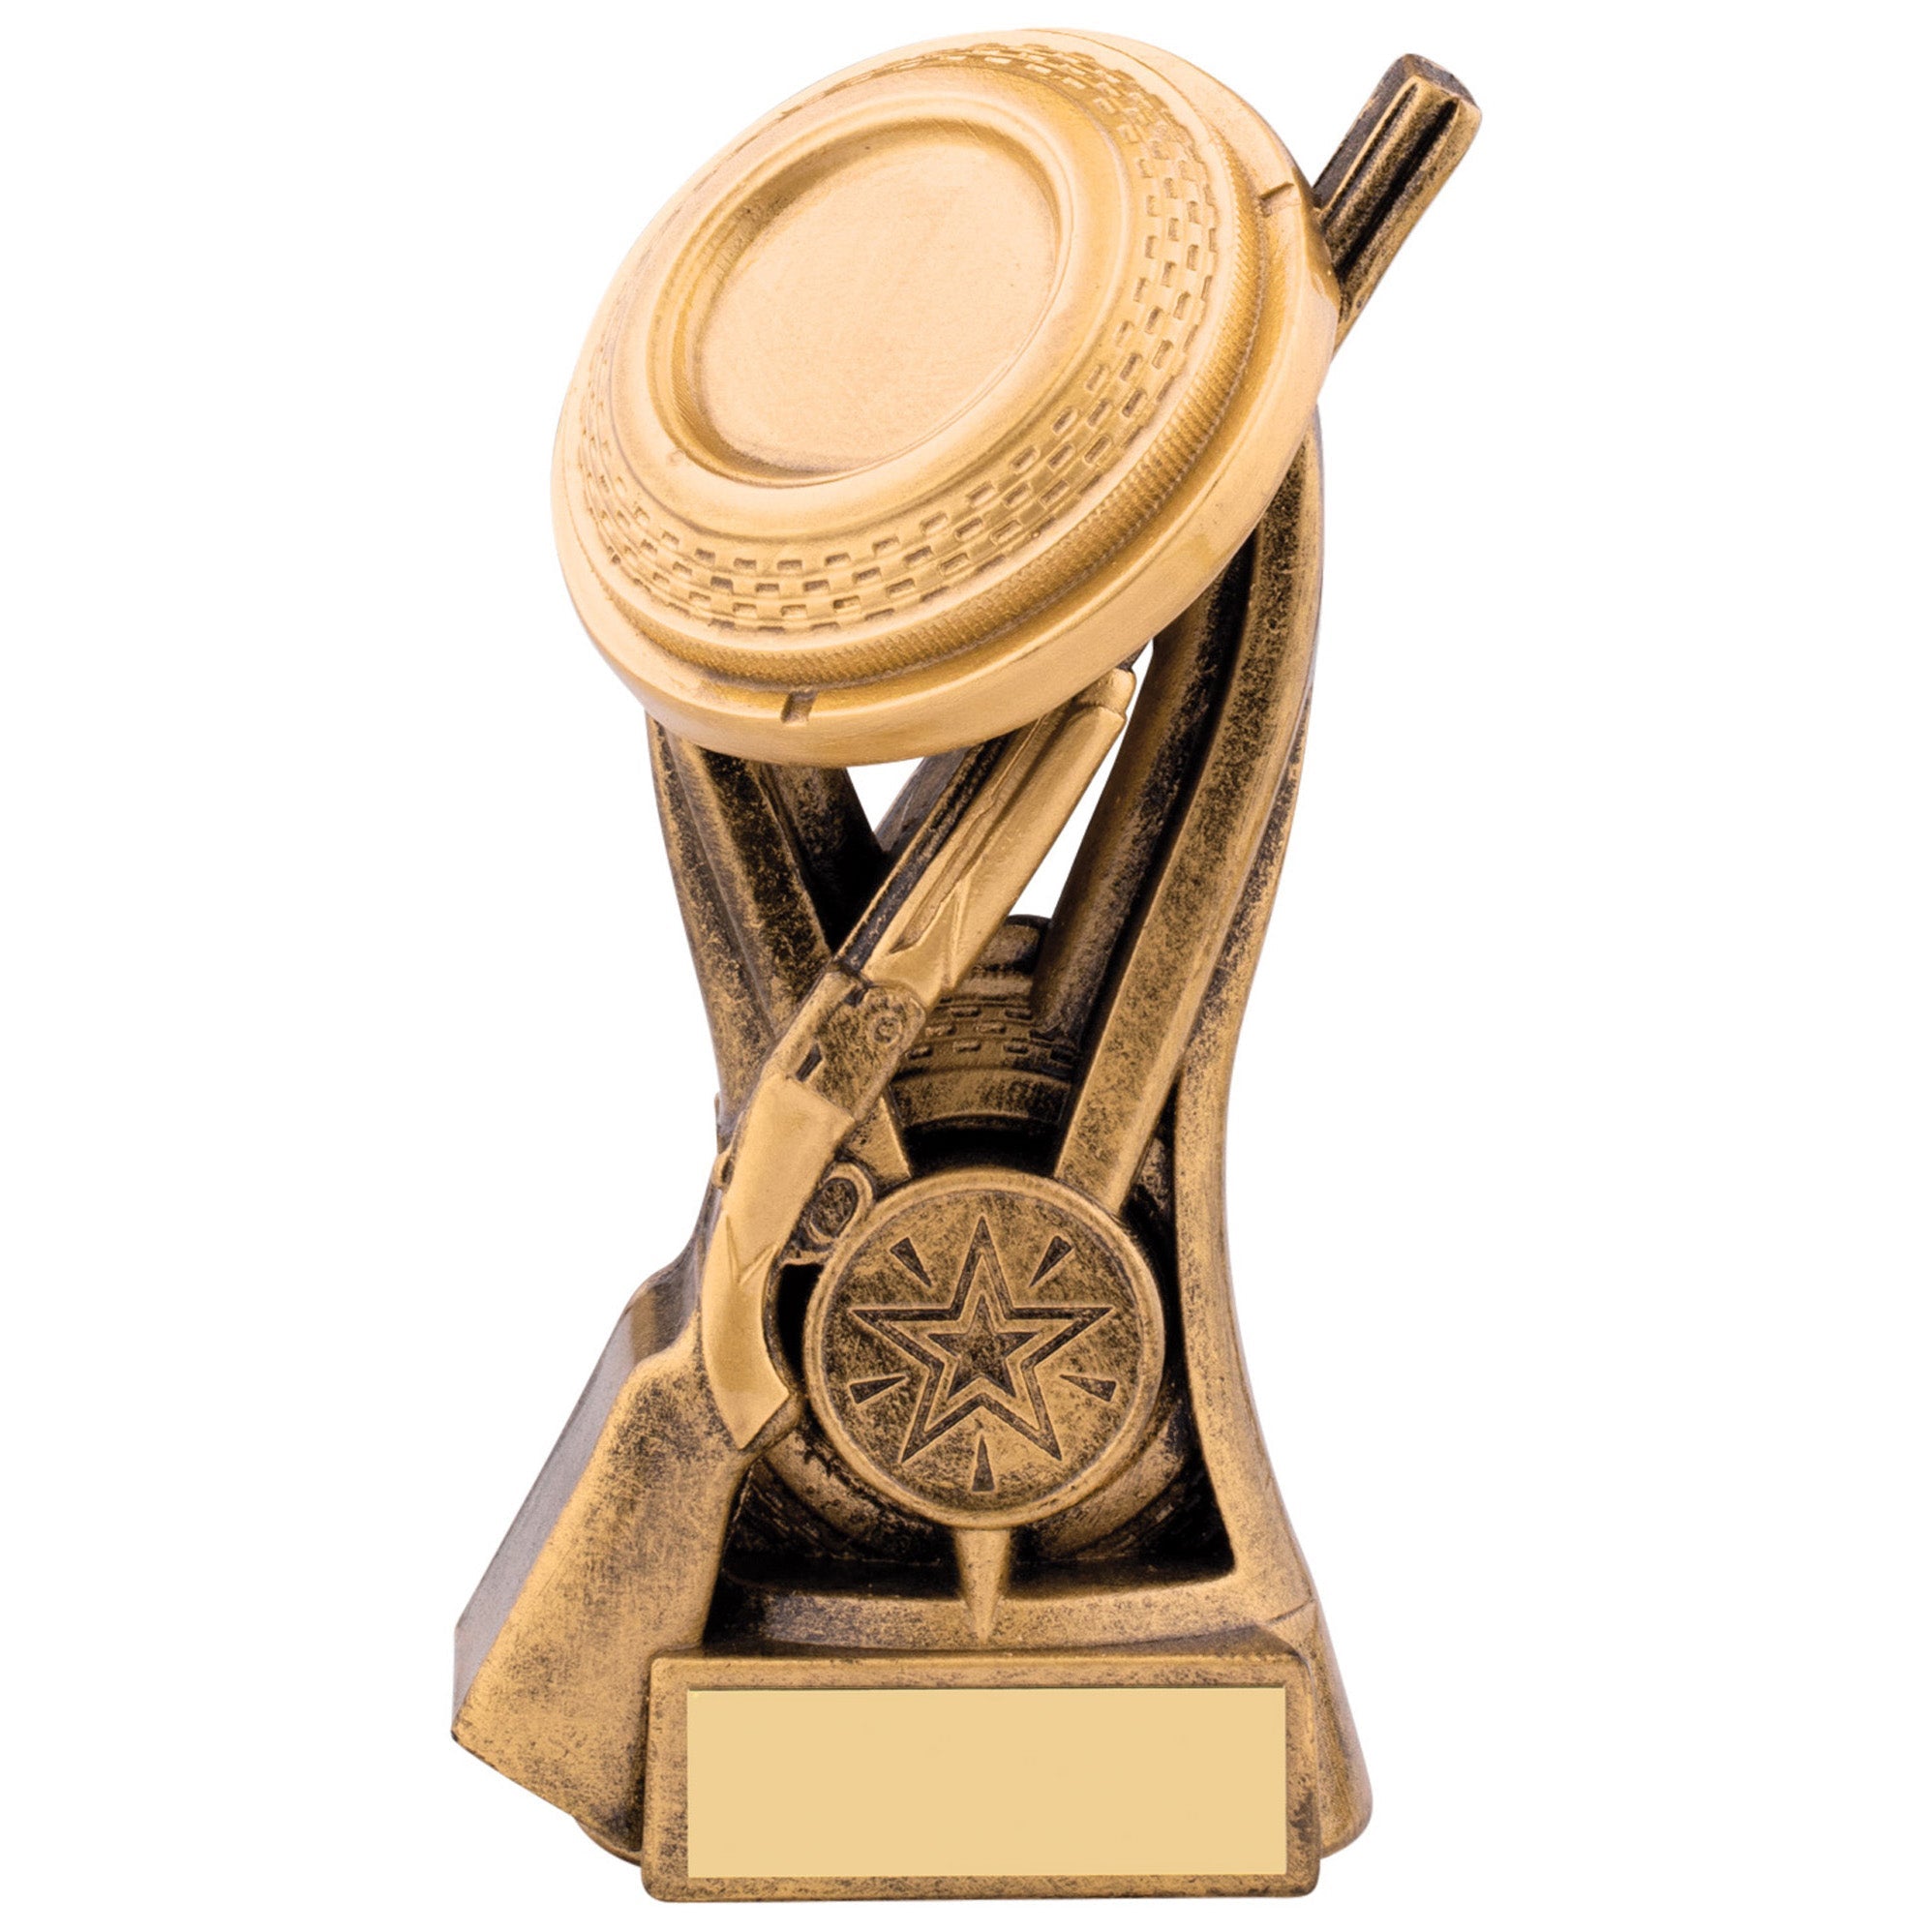 Clay Shooting Trophy - Available with Engraving and Custom 1" Centre